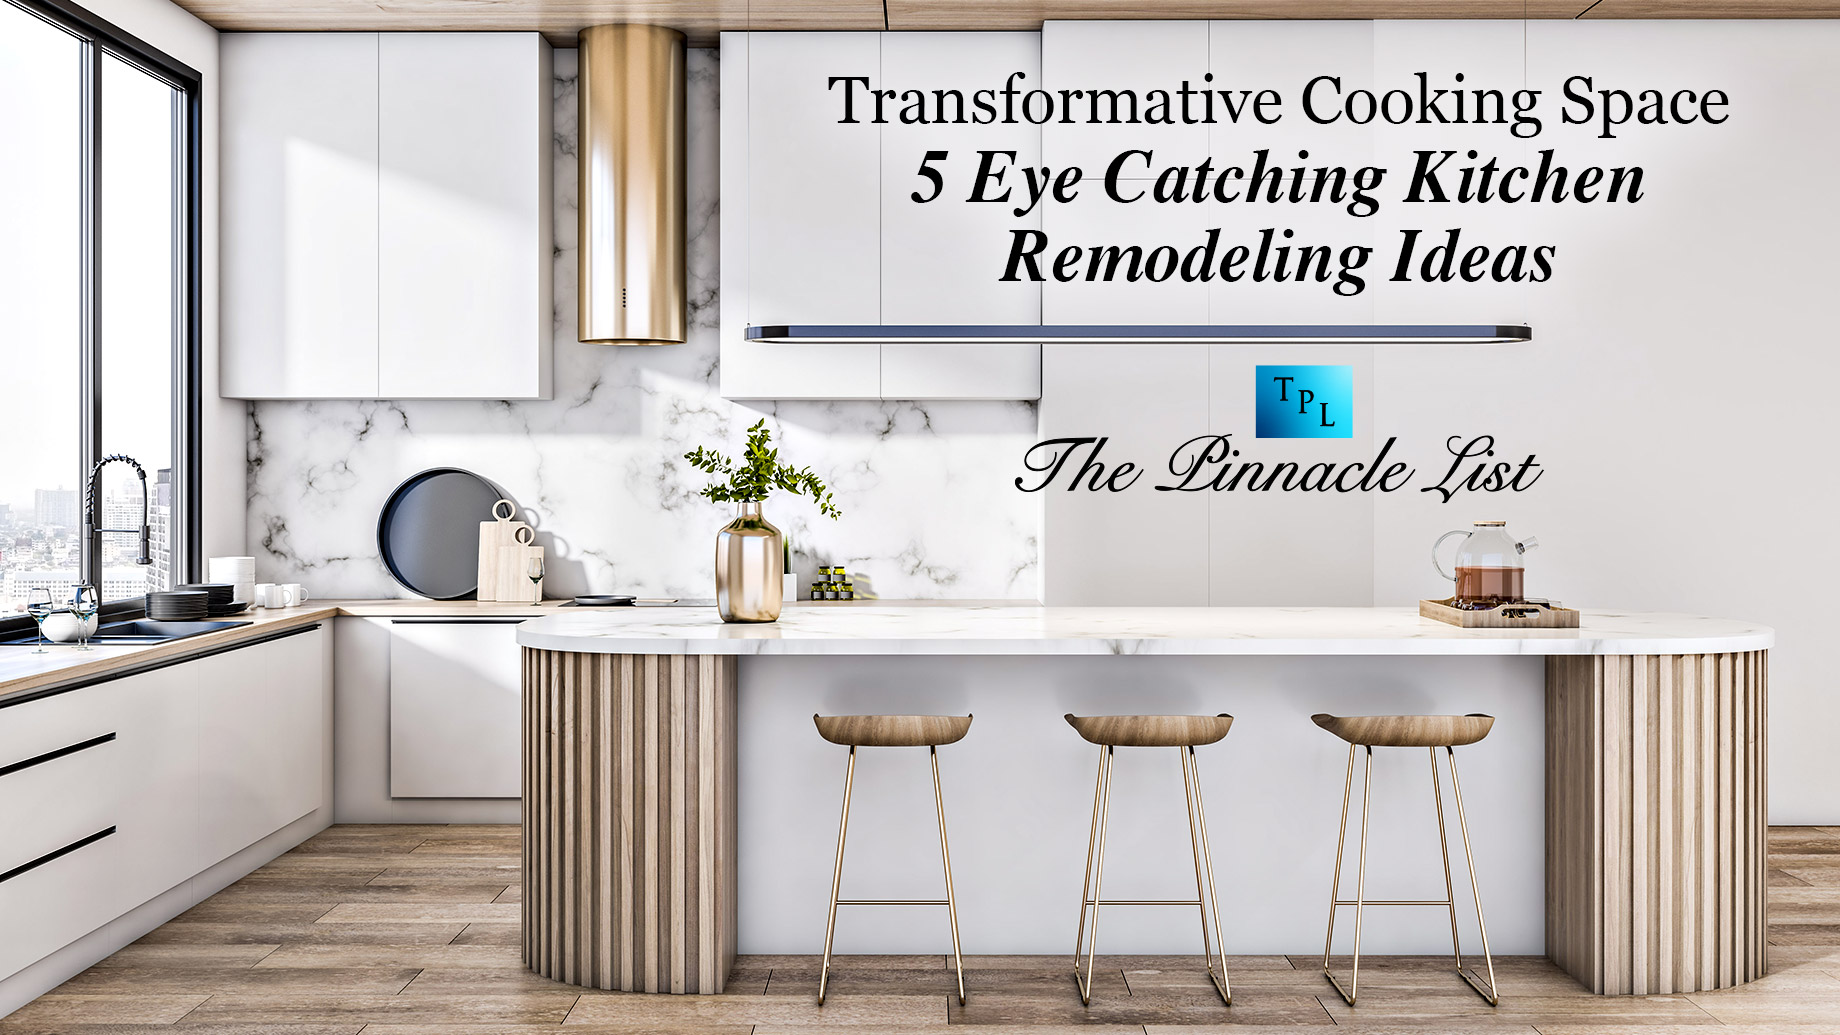 Transformative Cooking Space: 5 Eye Catching Kitchen Remodeling Ideas